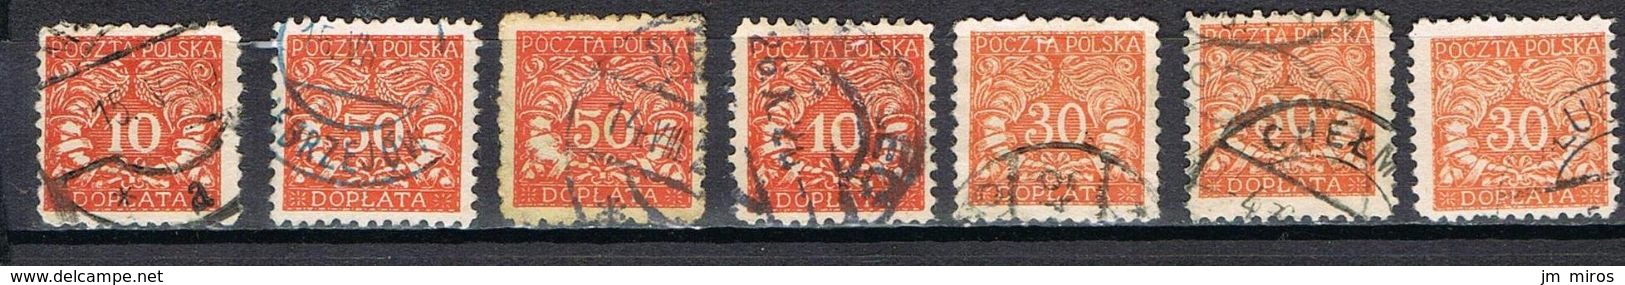 POLOGNE TAXE 16-18-19 - Postage Due